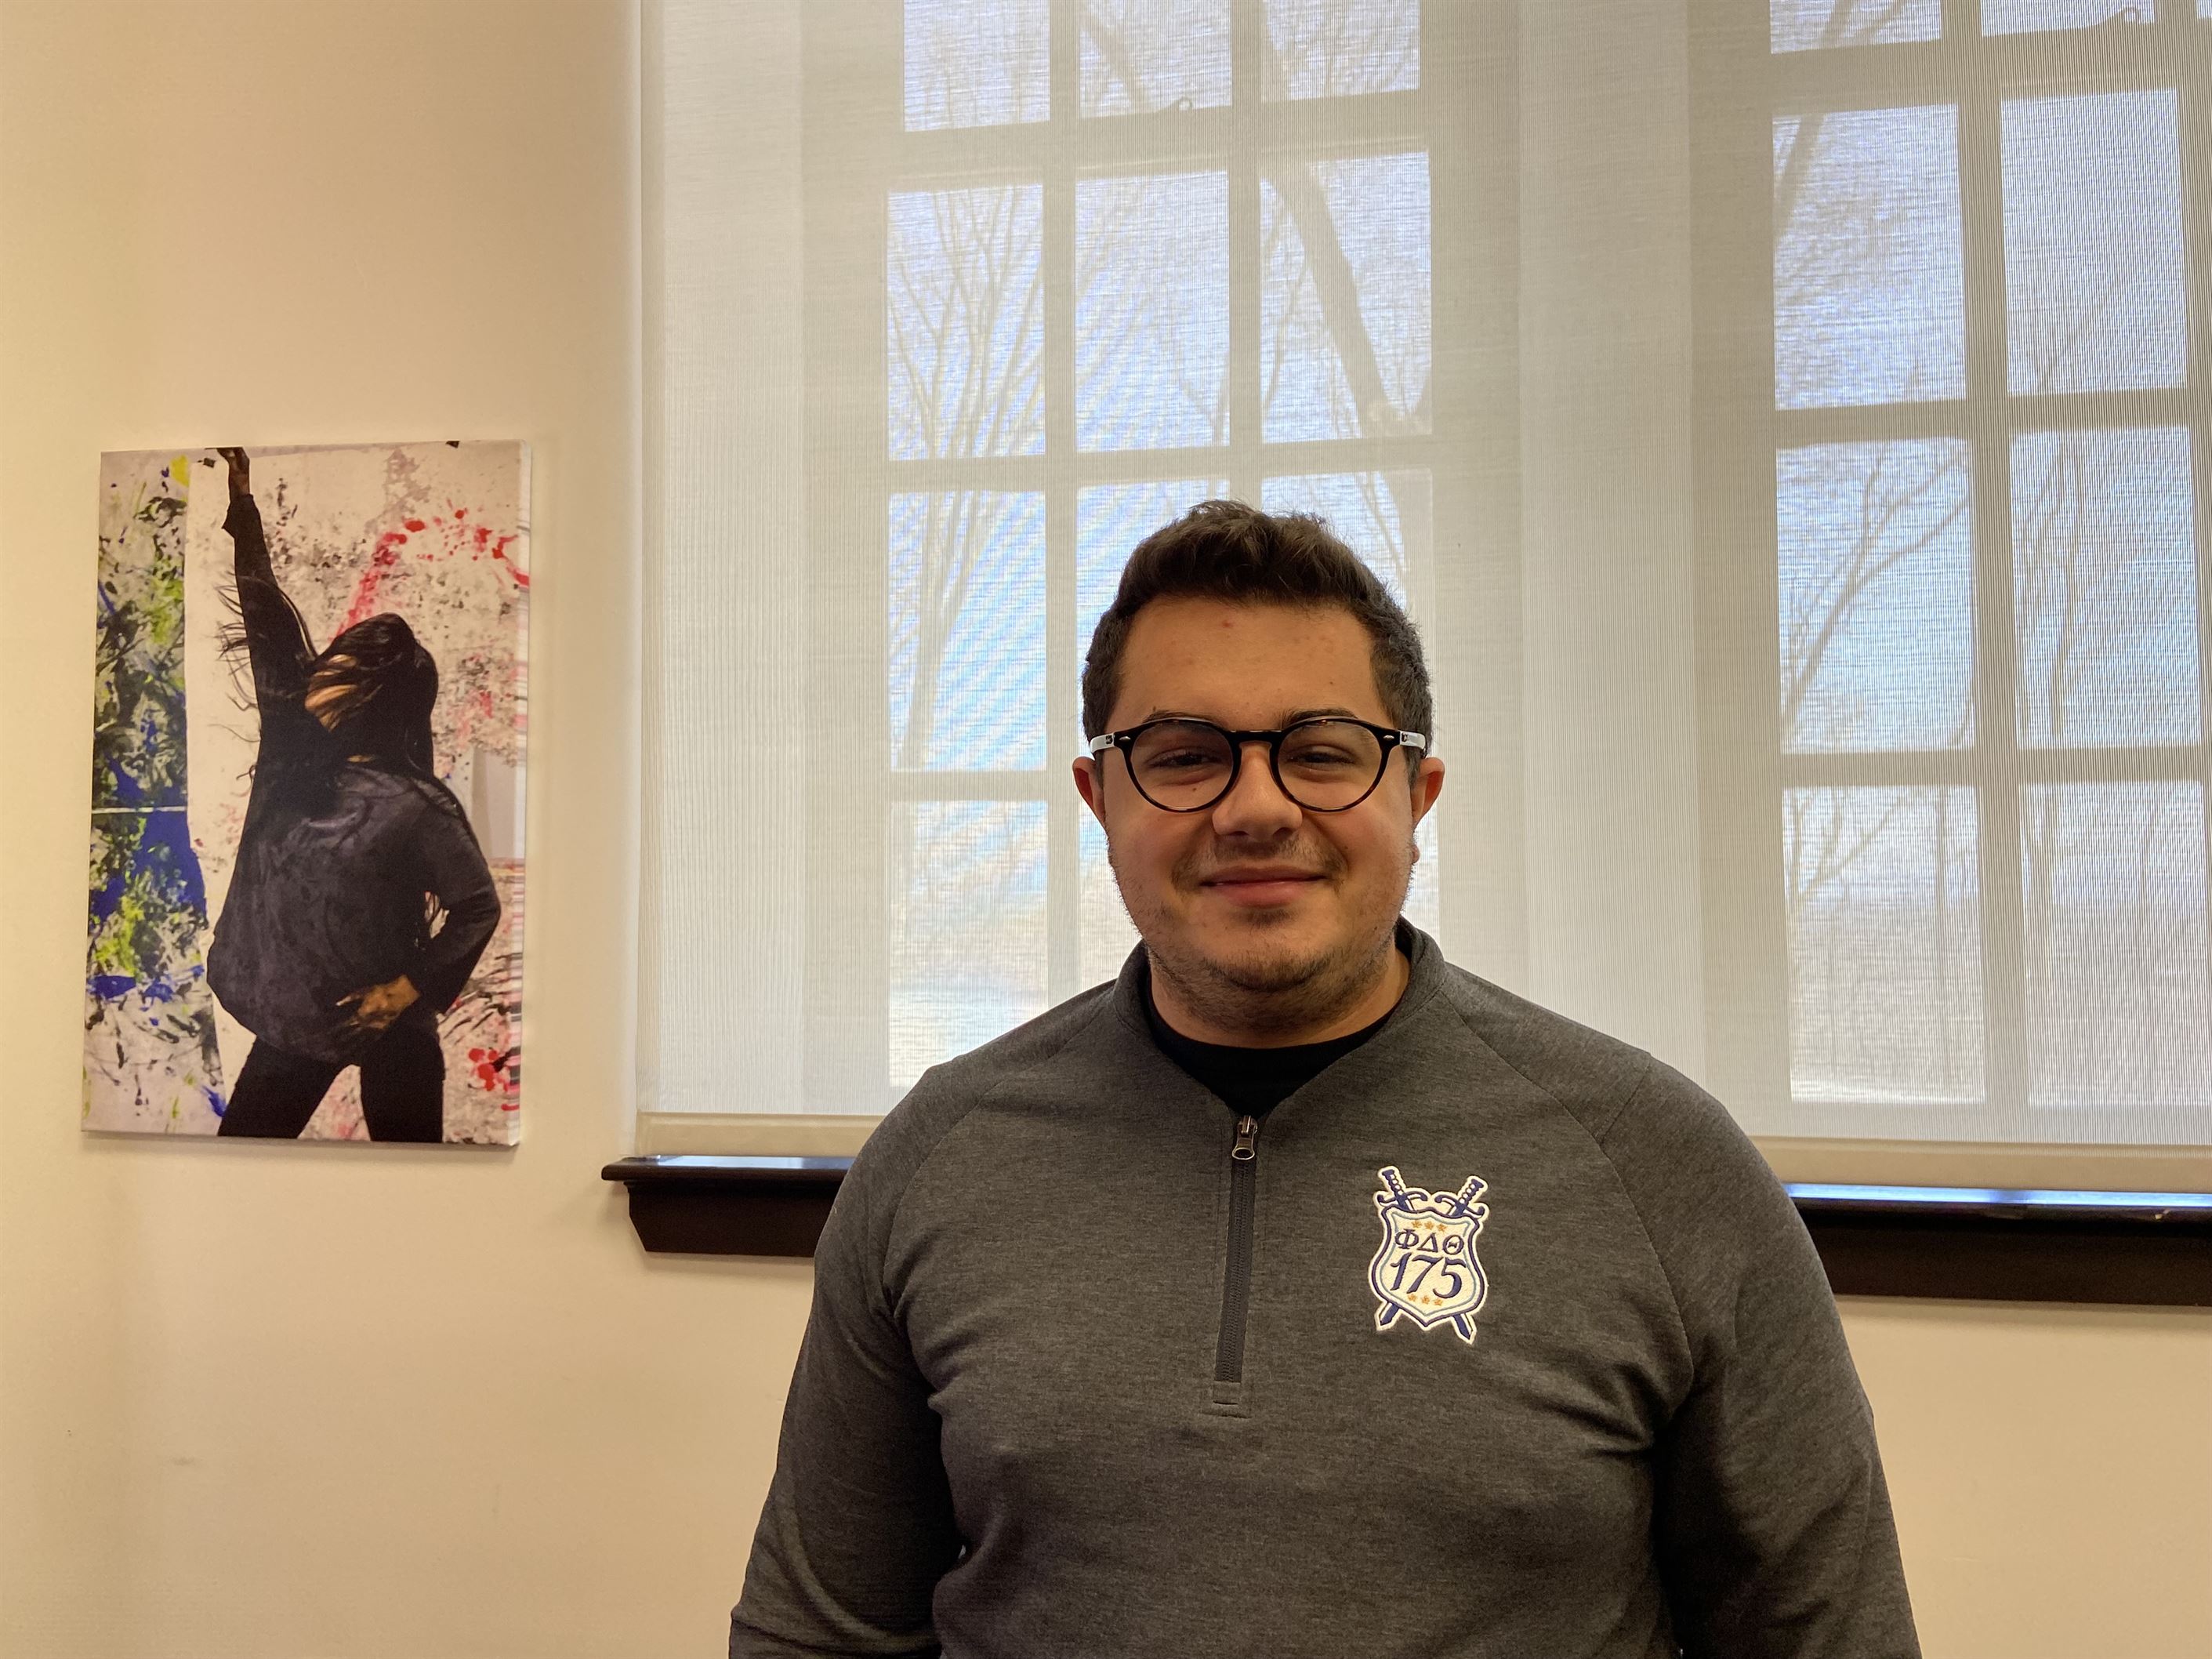 Ryan Breyta, senior journalism and digital media major,  was confused by the criminal mischief but wonders if there is a bigger issue.
Erin Lawlor | The Montclarion